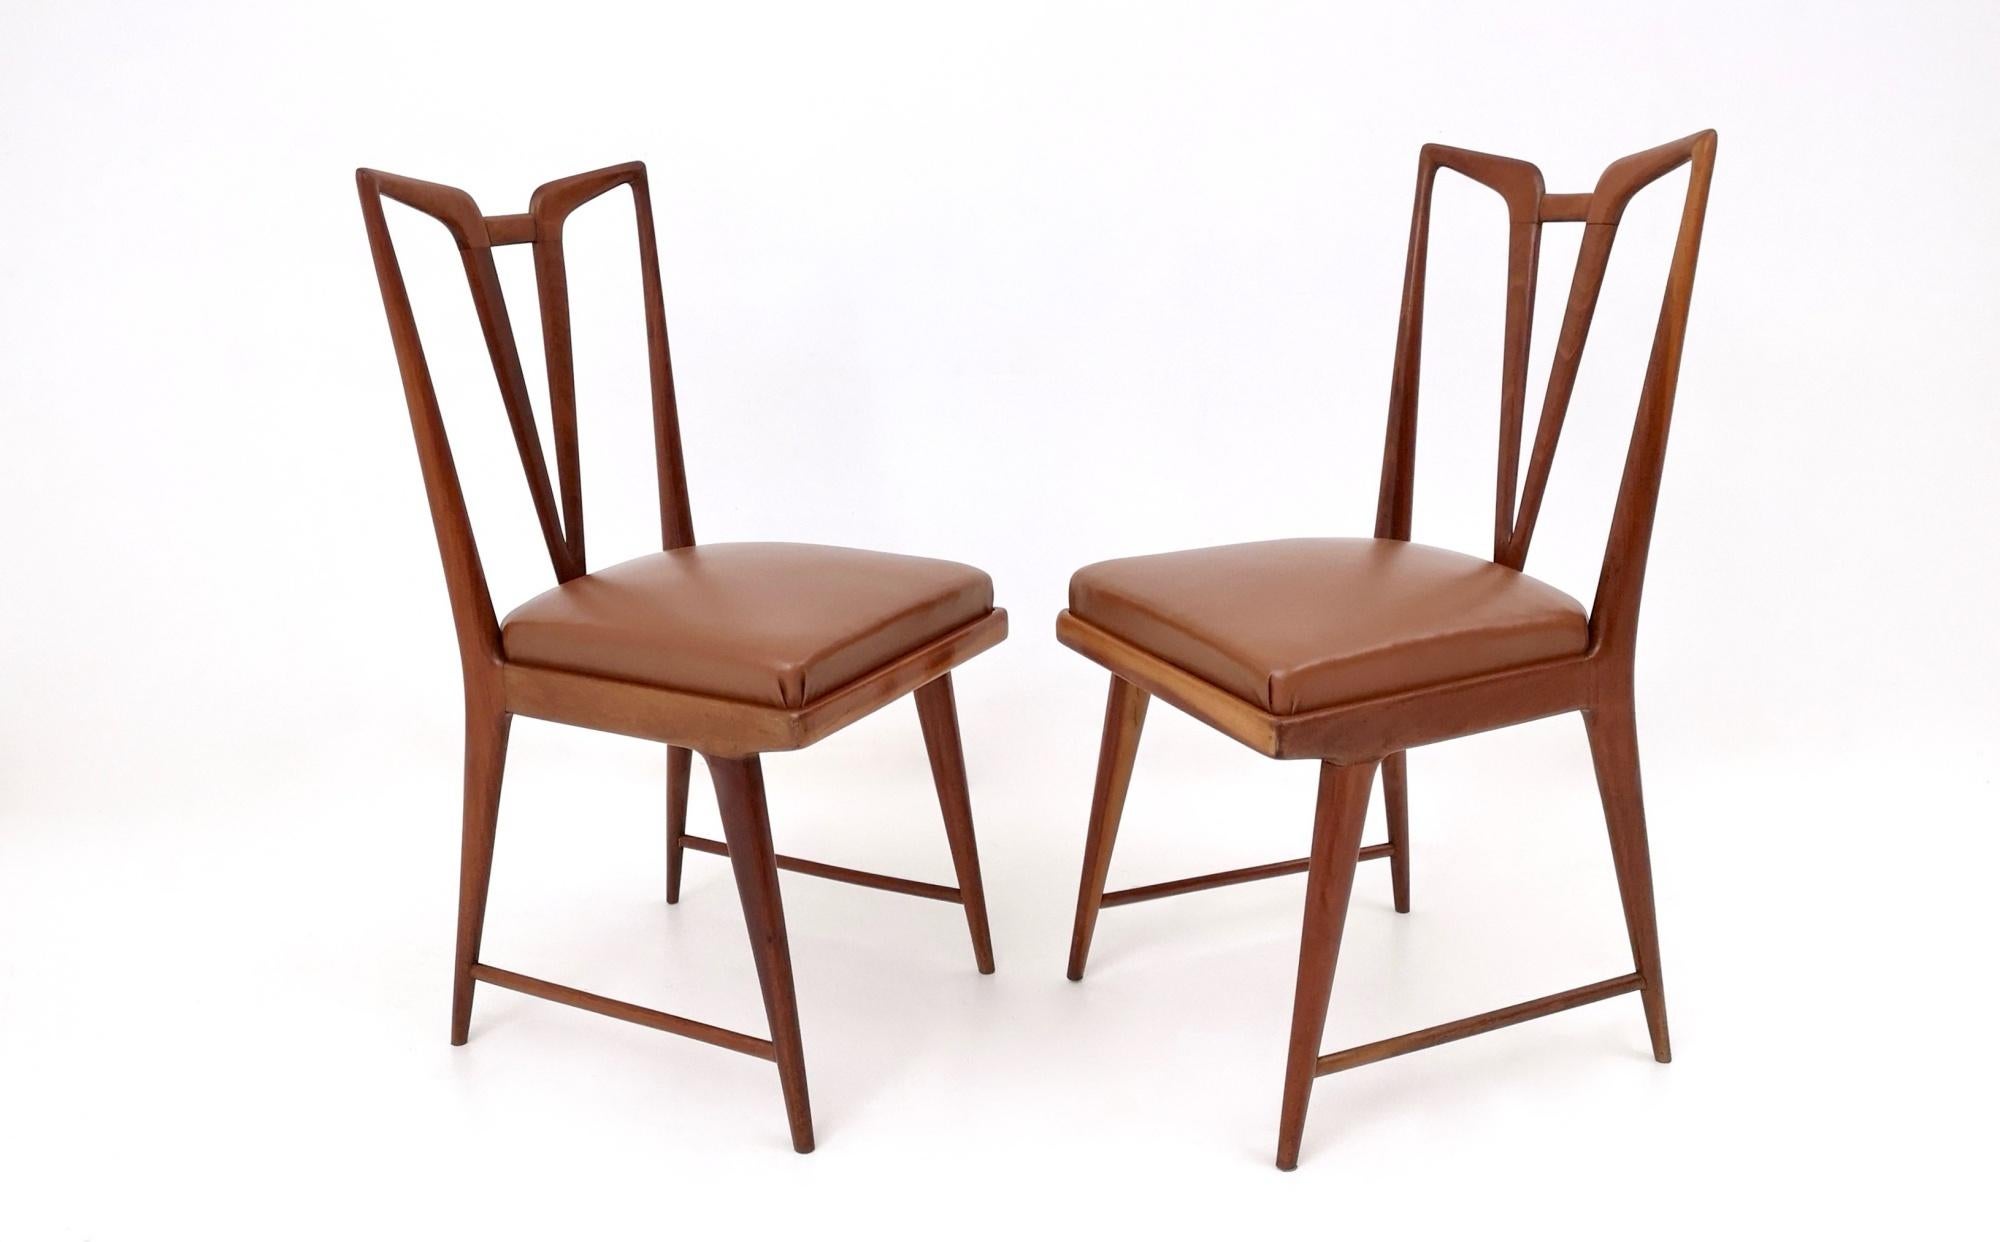 These chairs feature a solid wood frame and are upholstered in their original skai, which has no rips nor stains.
The padding is original and in very good condition.
They may show slight traces of use since they're vintage, but they can be